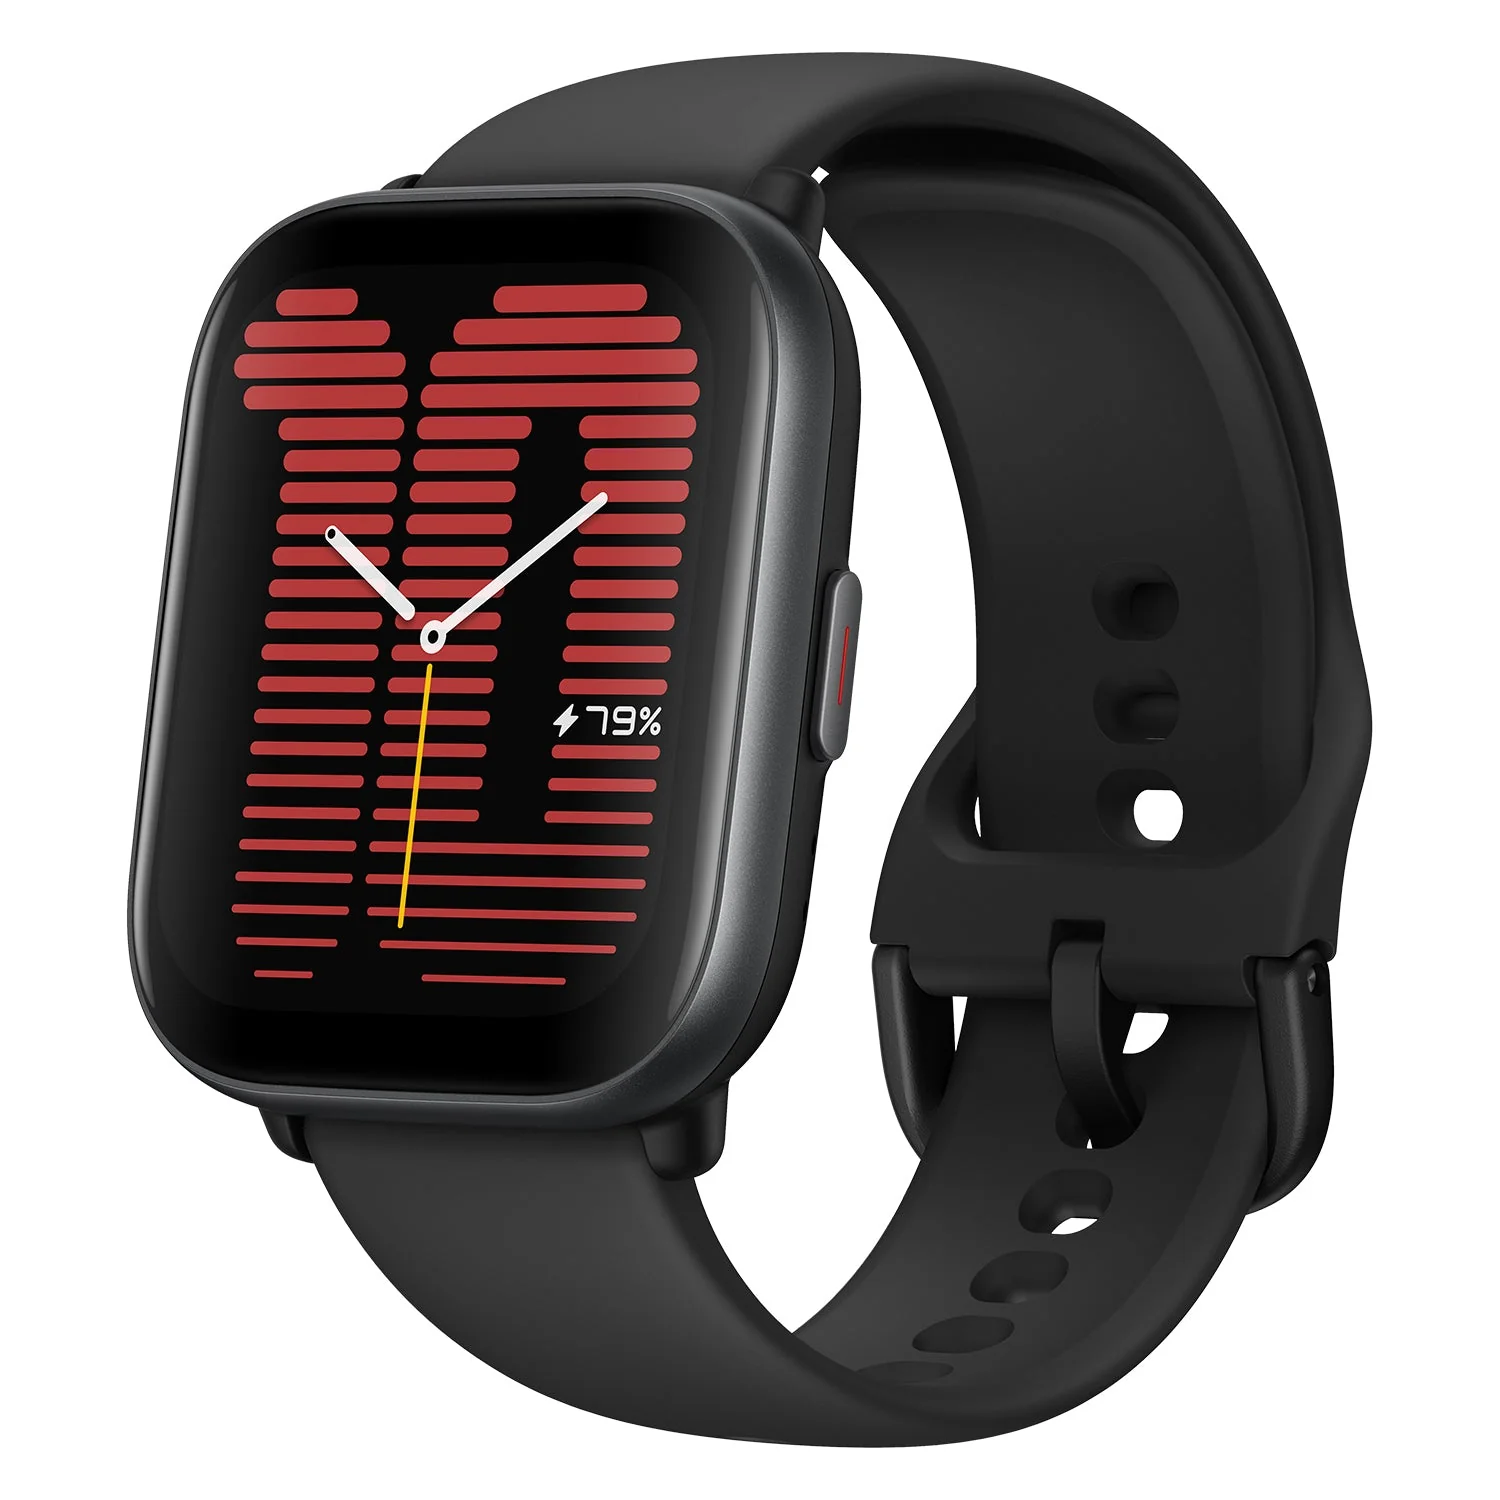 Amazfit Active: A New Smartwatch Entry in India's Tech Market